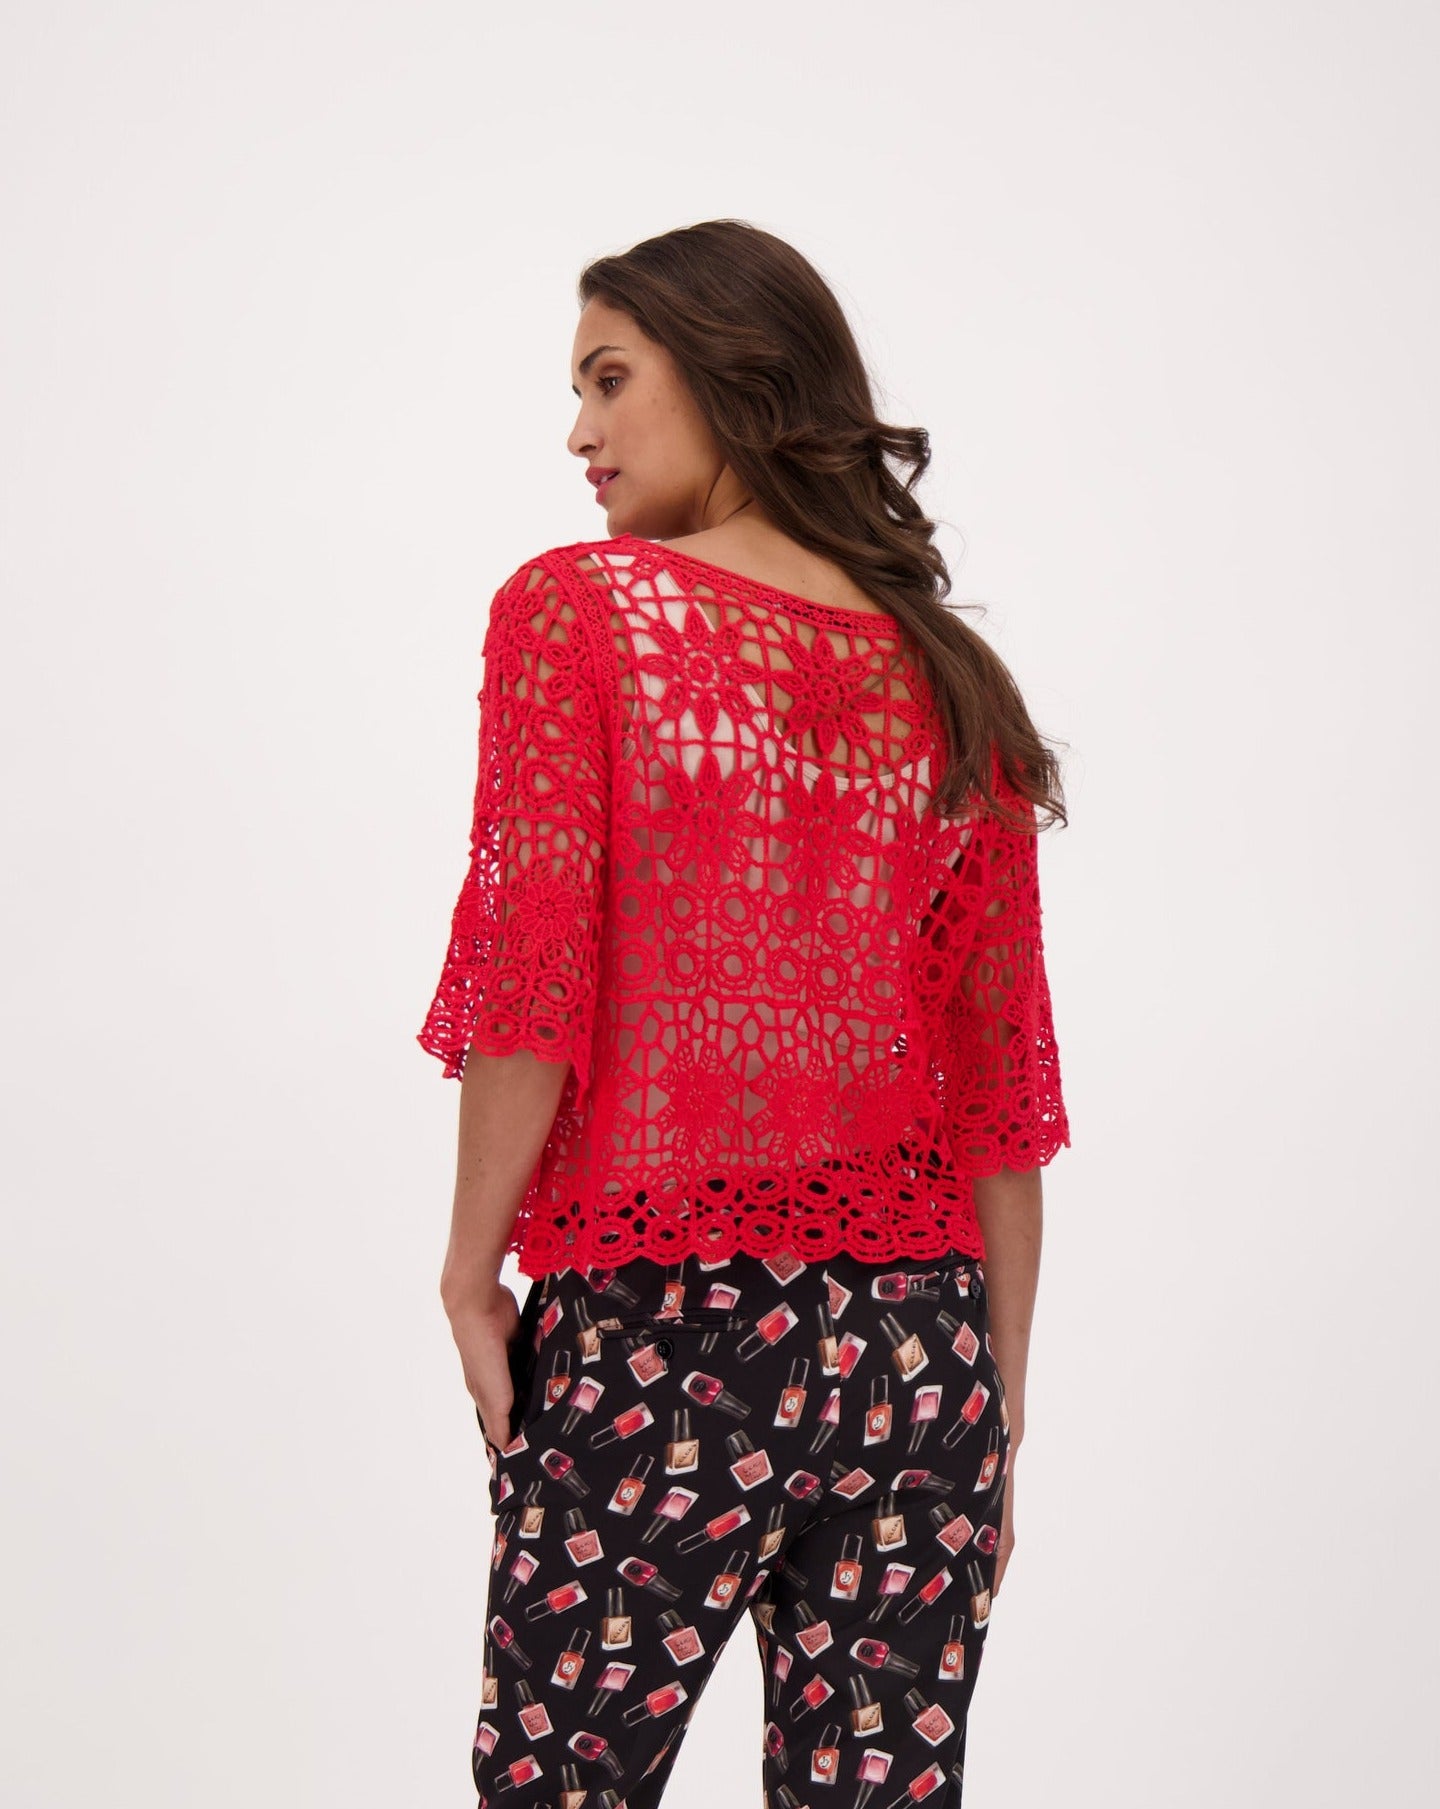 Crochet Cover Up Top